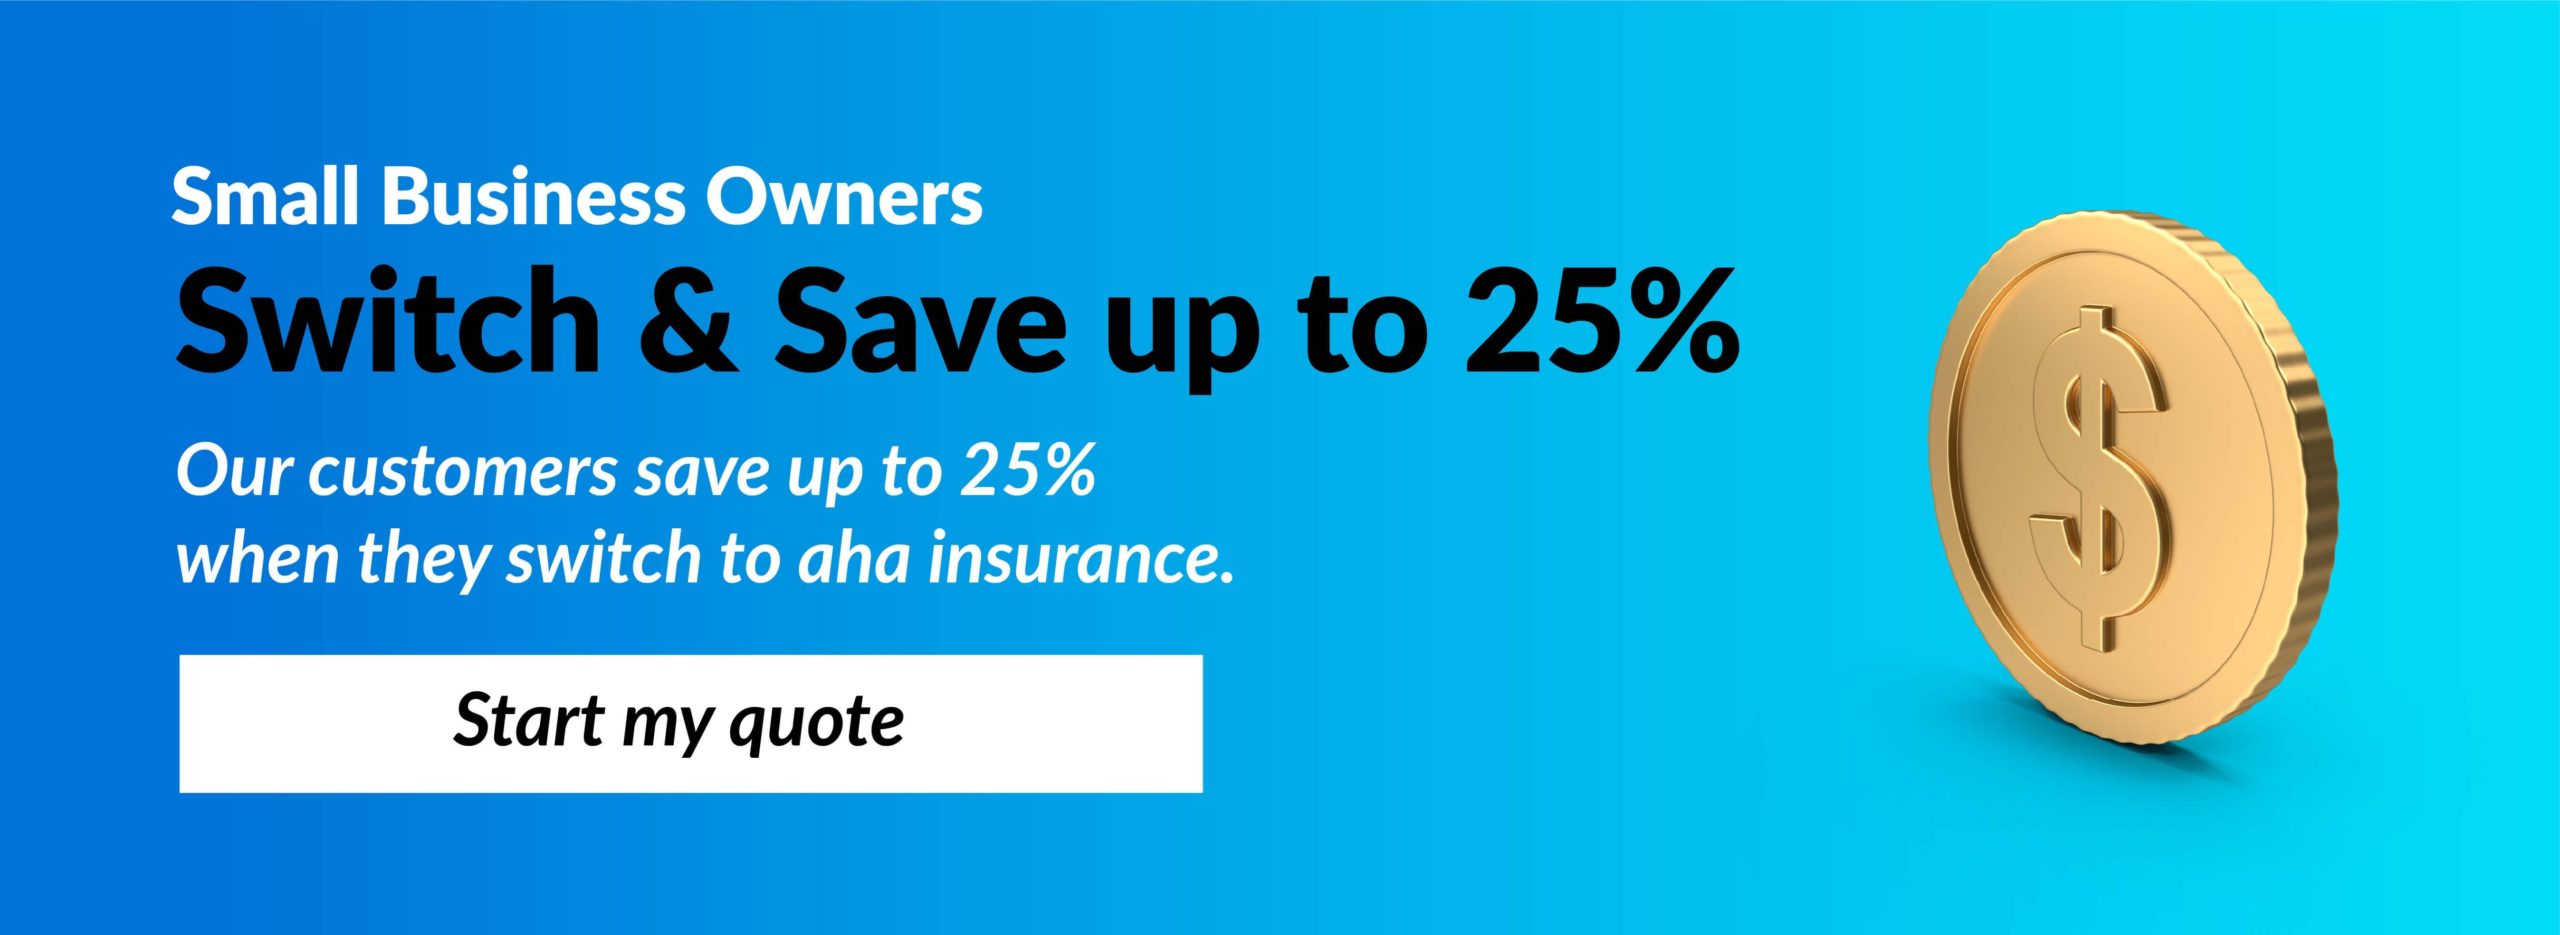 Small Business Owners Switch & Save up to 25% - Our customers save up to 25% when they switch to aha insurance. Start my quote